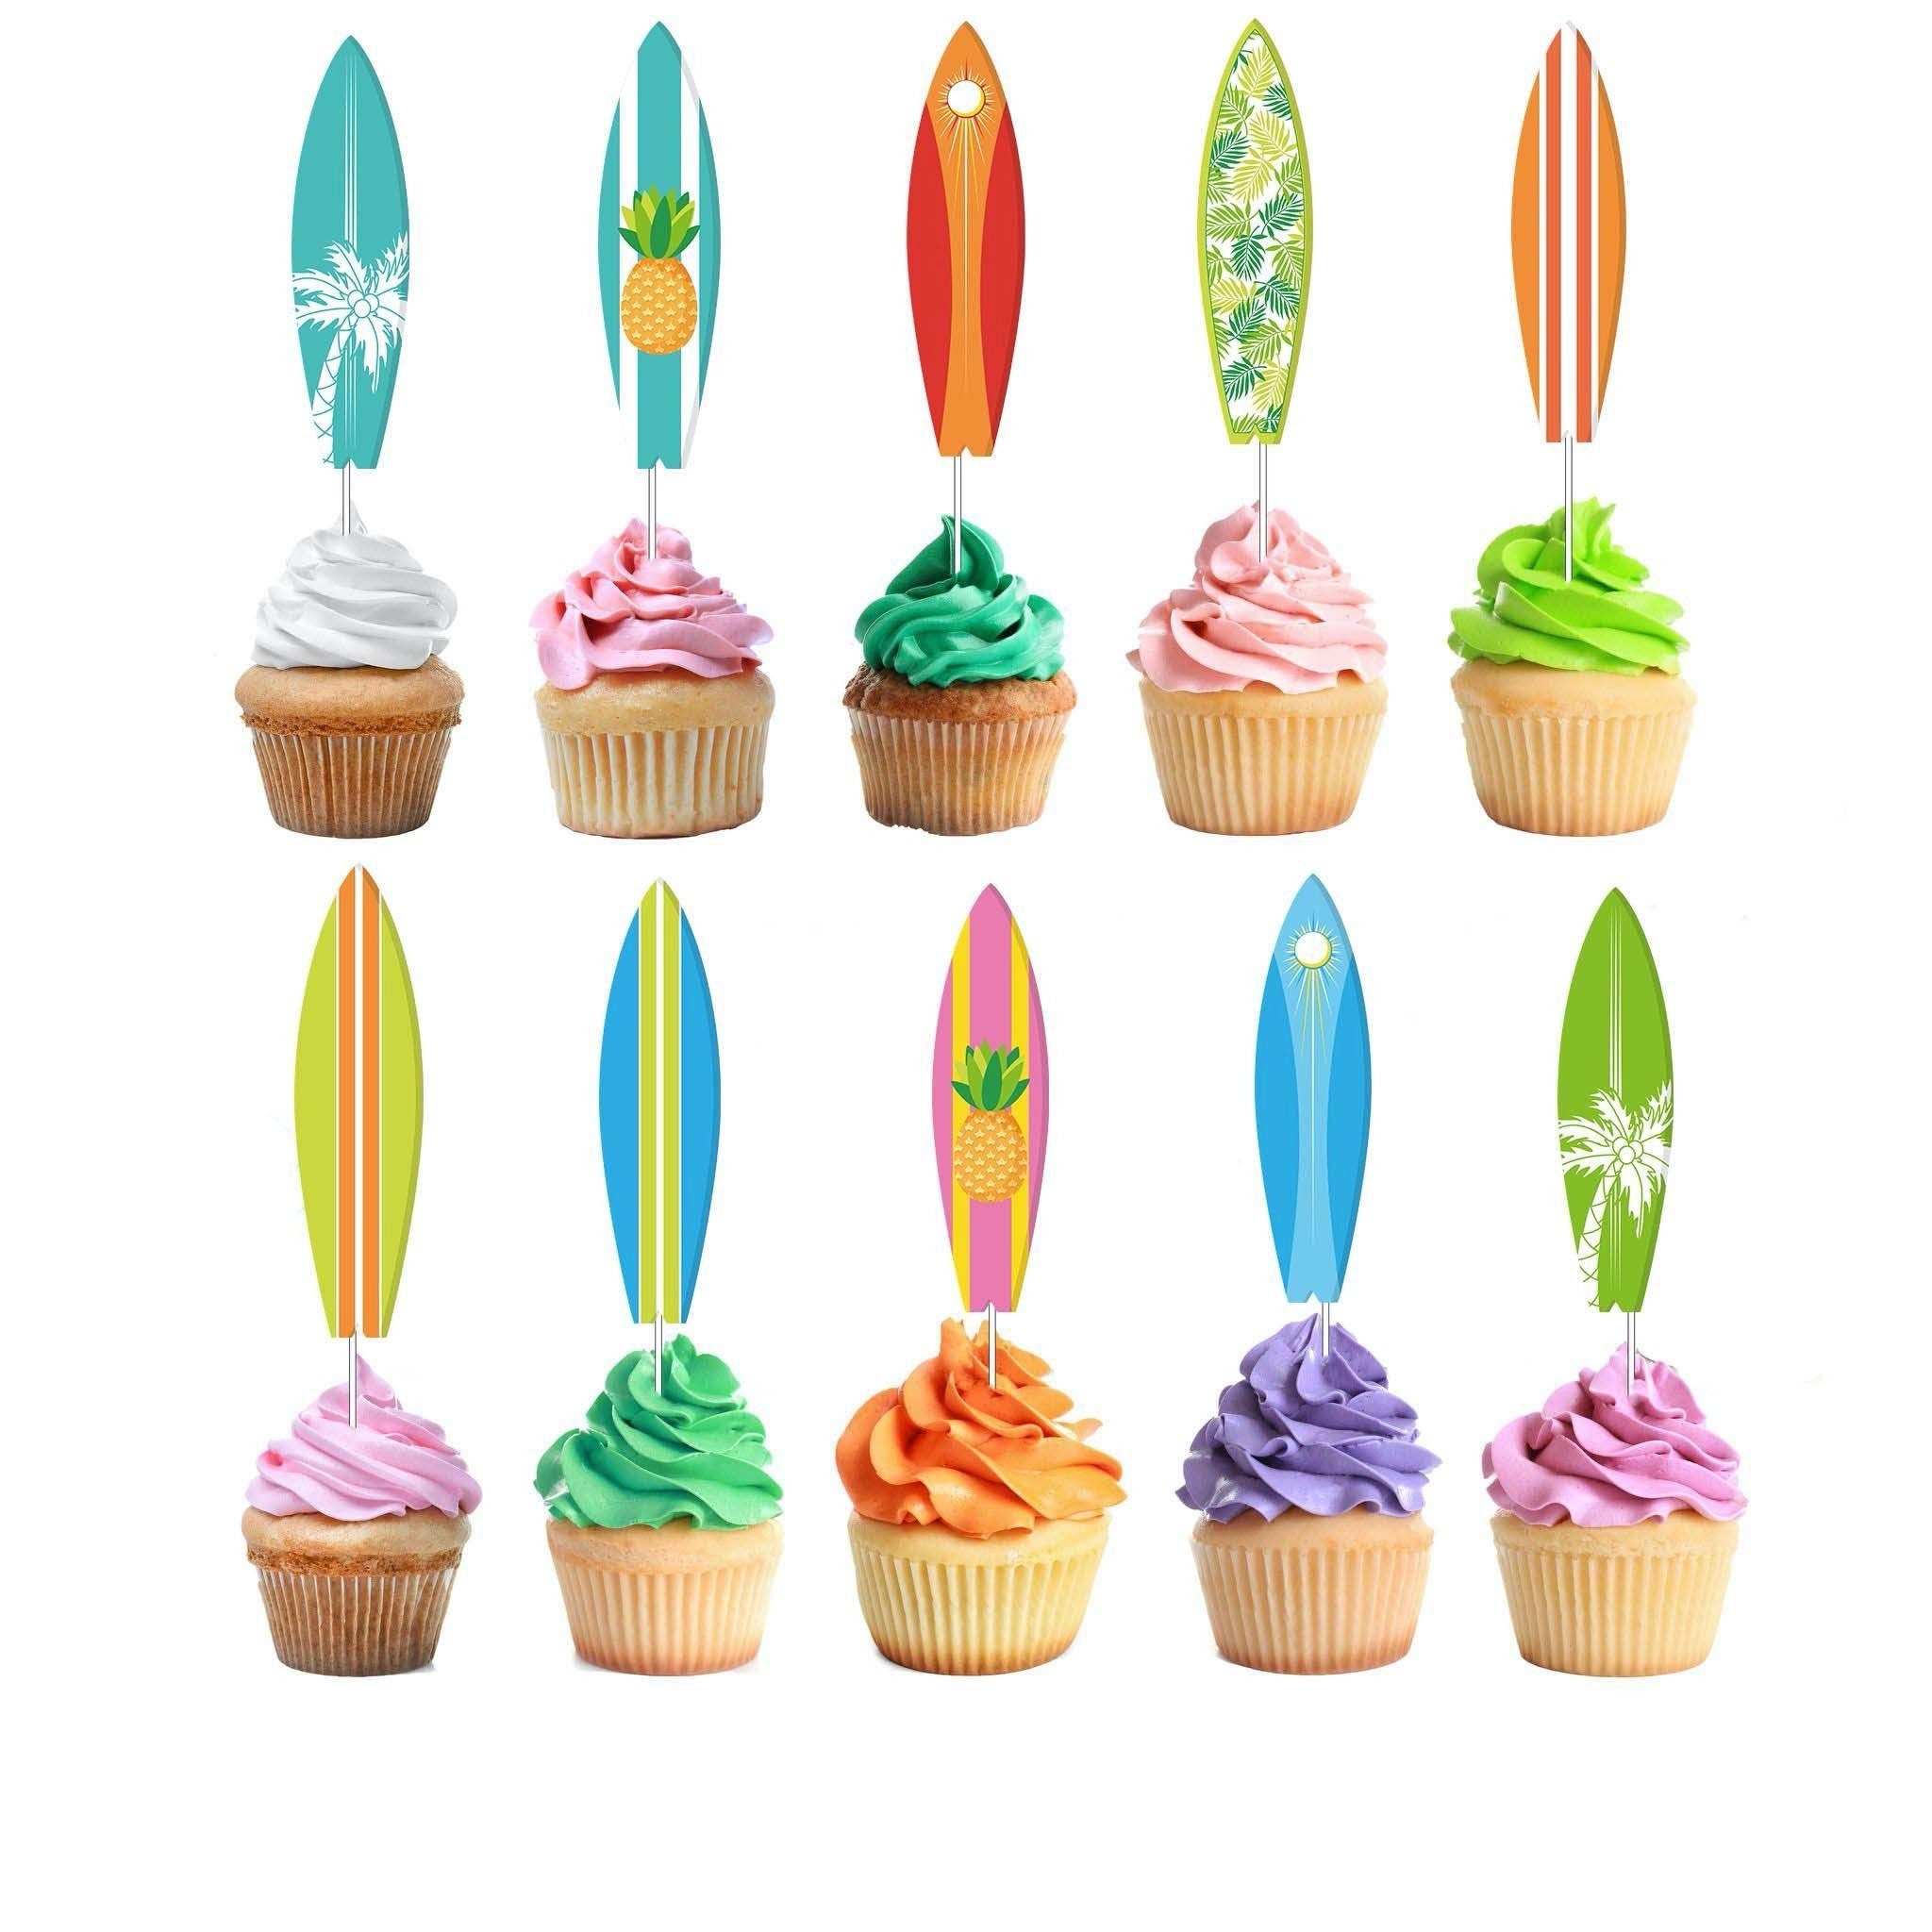 Tropical Surfboard Cupcake Toppers - Ride the Wave to Sweetness!